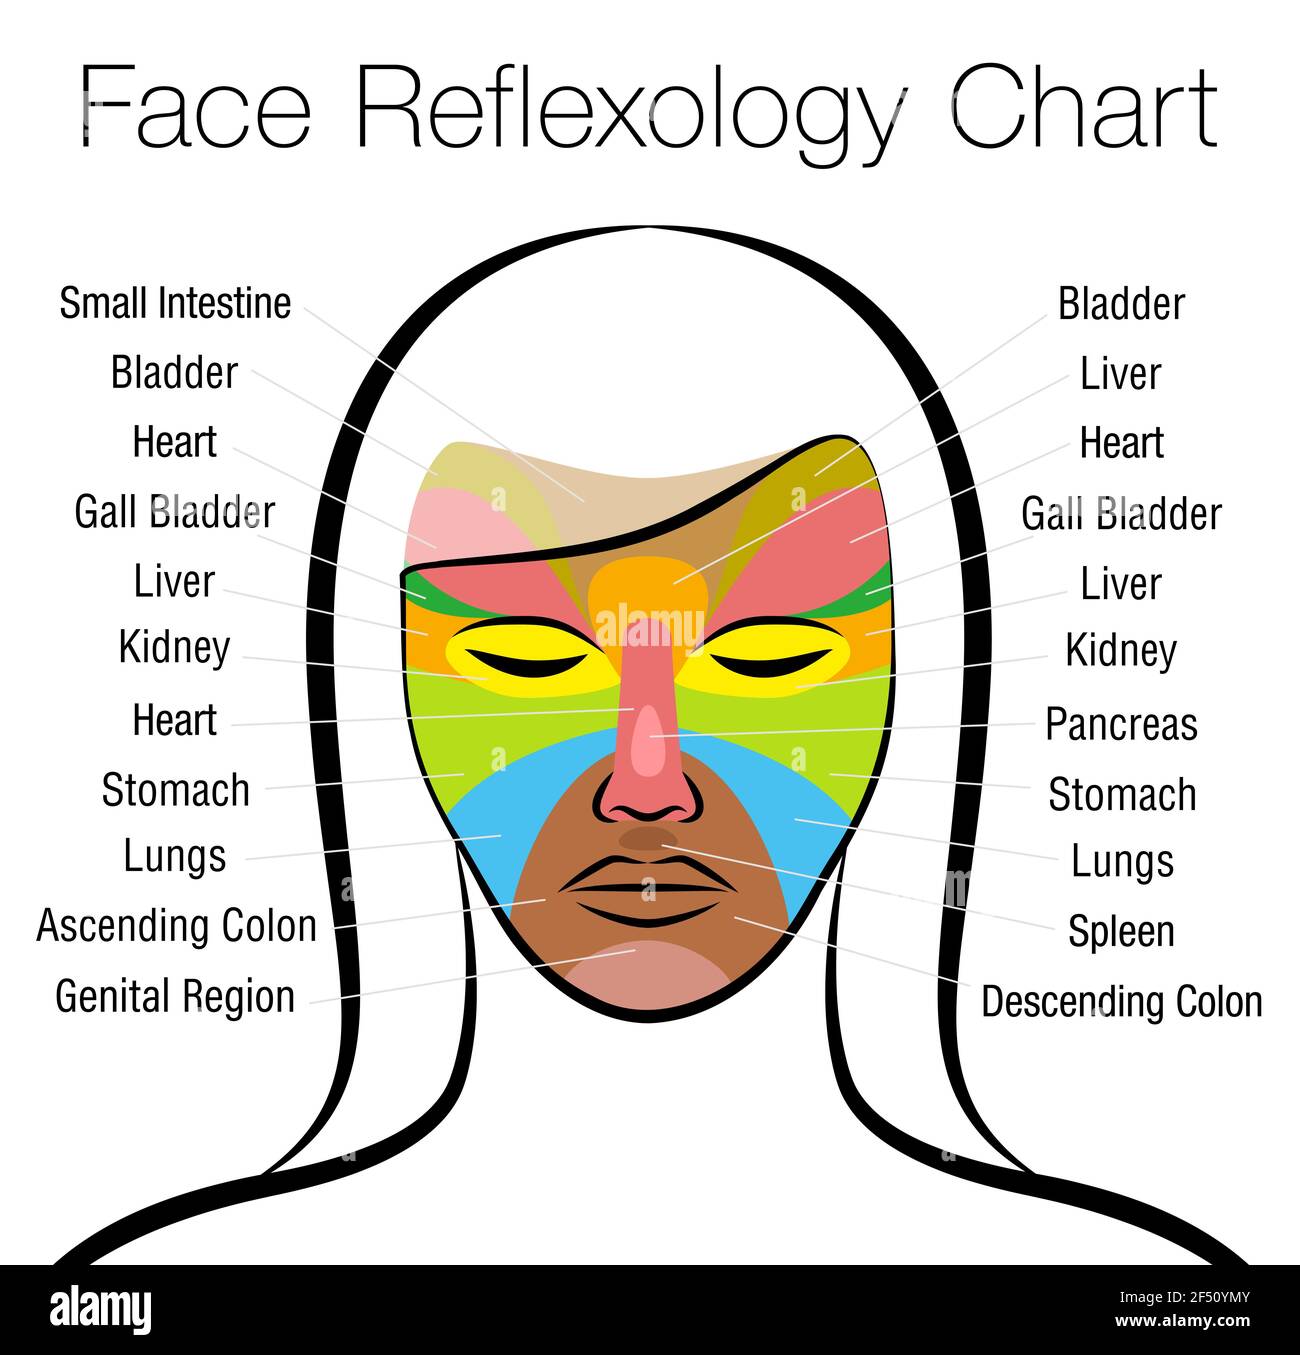 Face reflexology chart. Female face with colored areas and names of corresponding internal organs. Alternative acupressure and physiotherapy health. Stock Photo